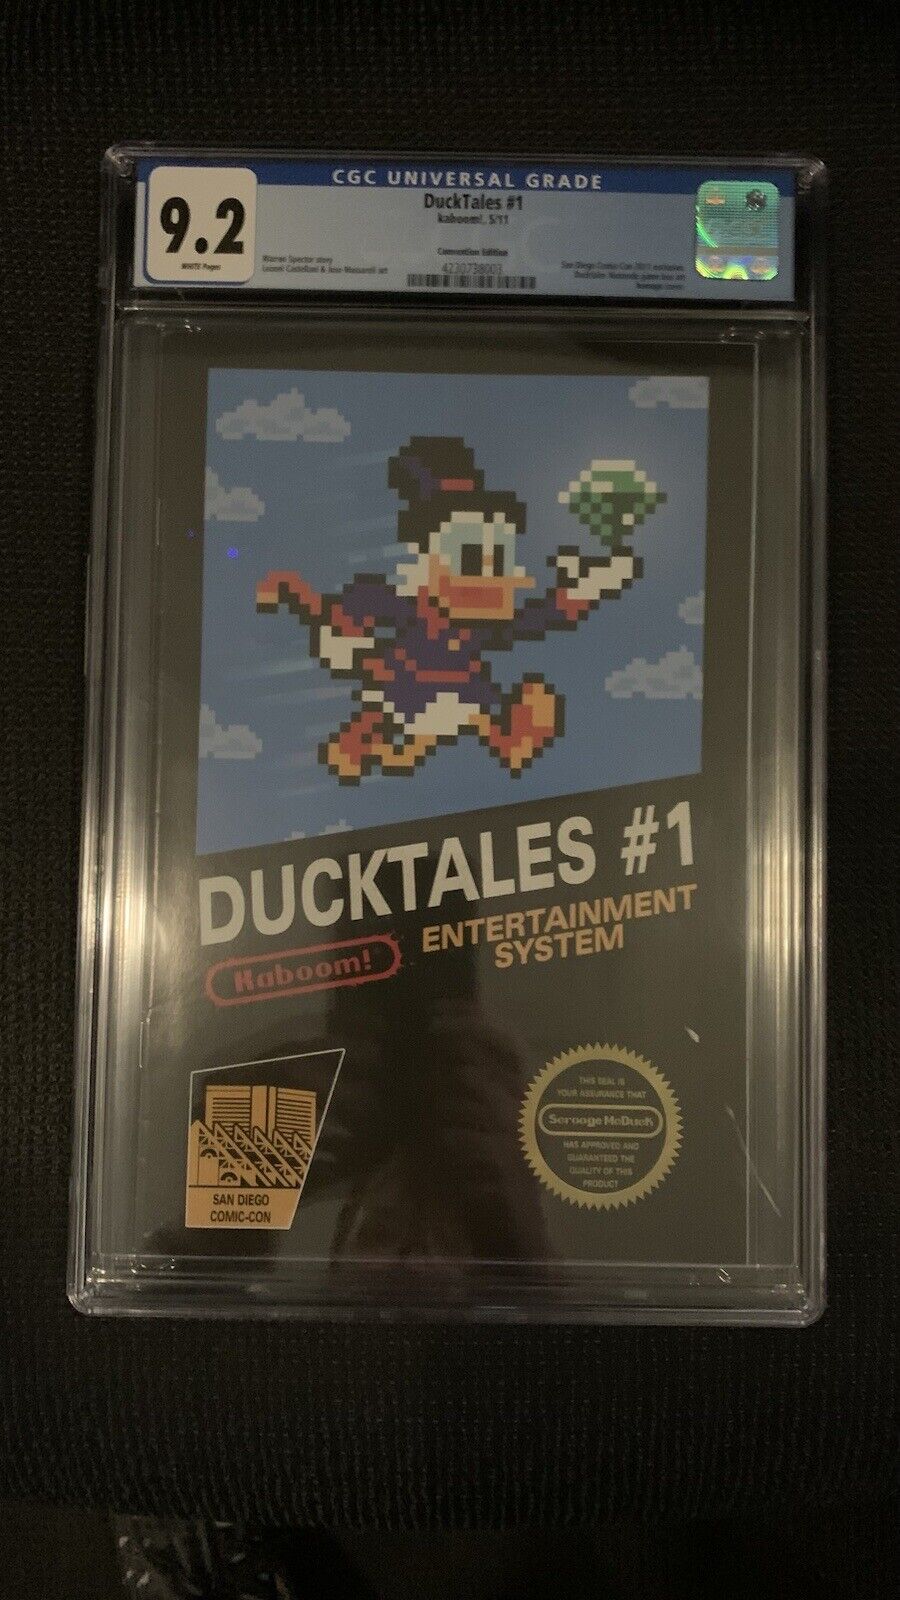 Duck Tales #1 SDCC 2011 Exclusive Nintendo Game box Artwork Limited Edition